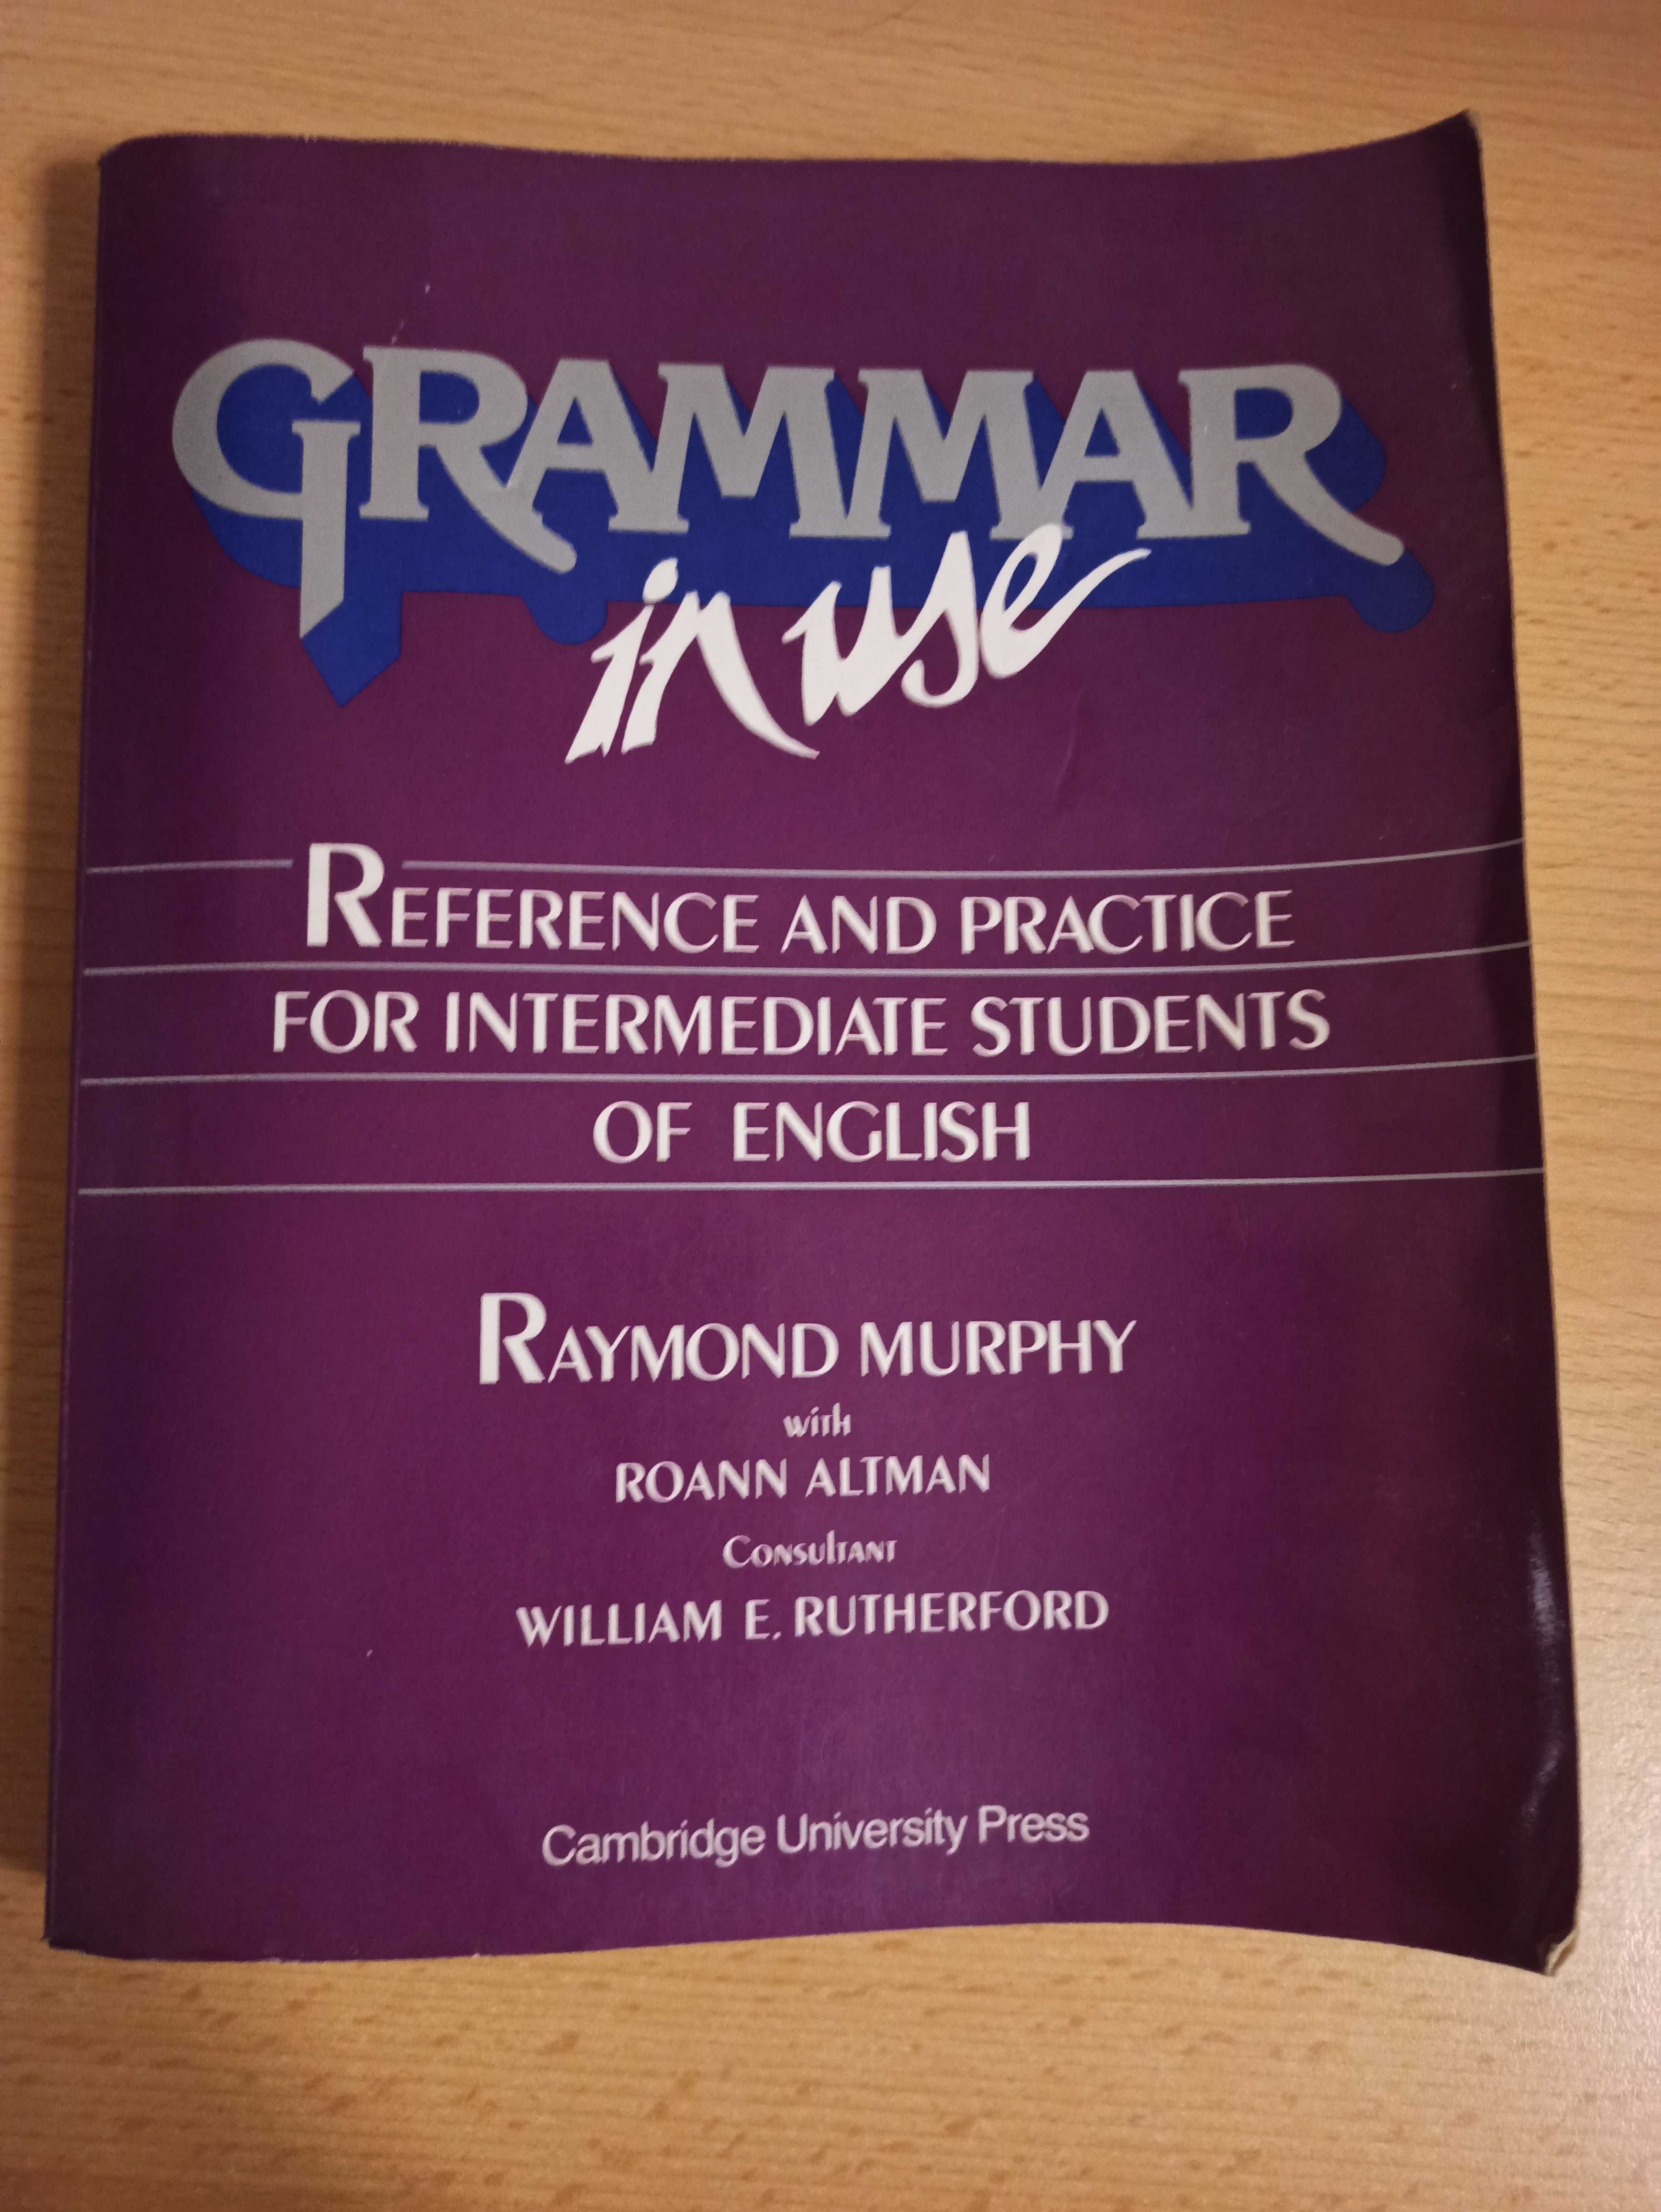 Grammar in use Reference and practice for intermediate students